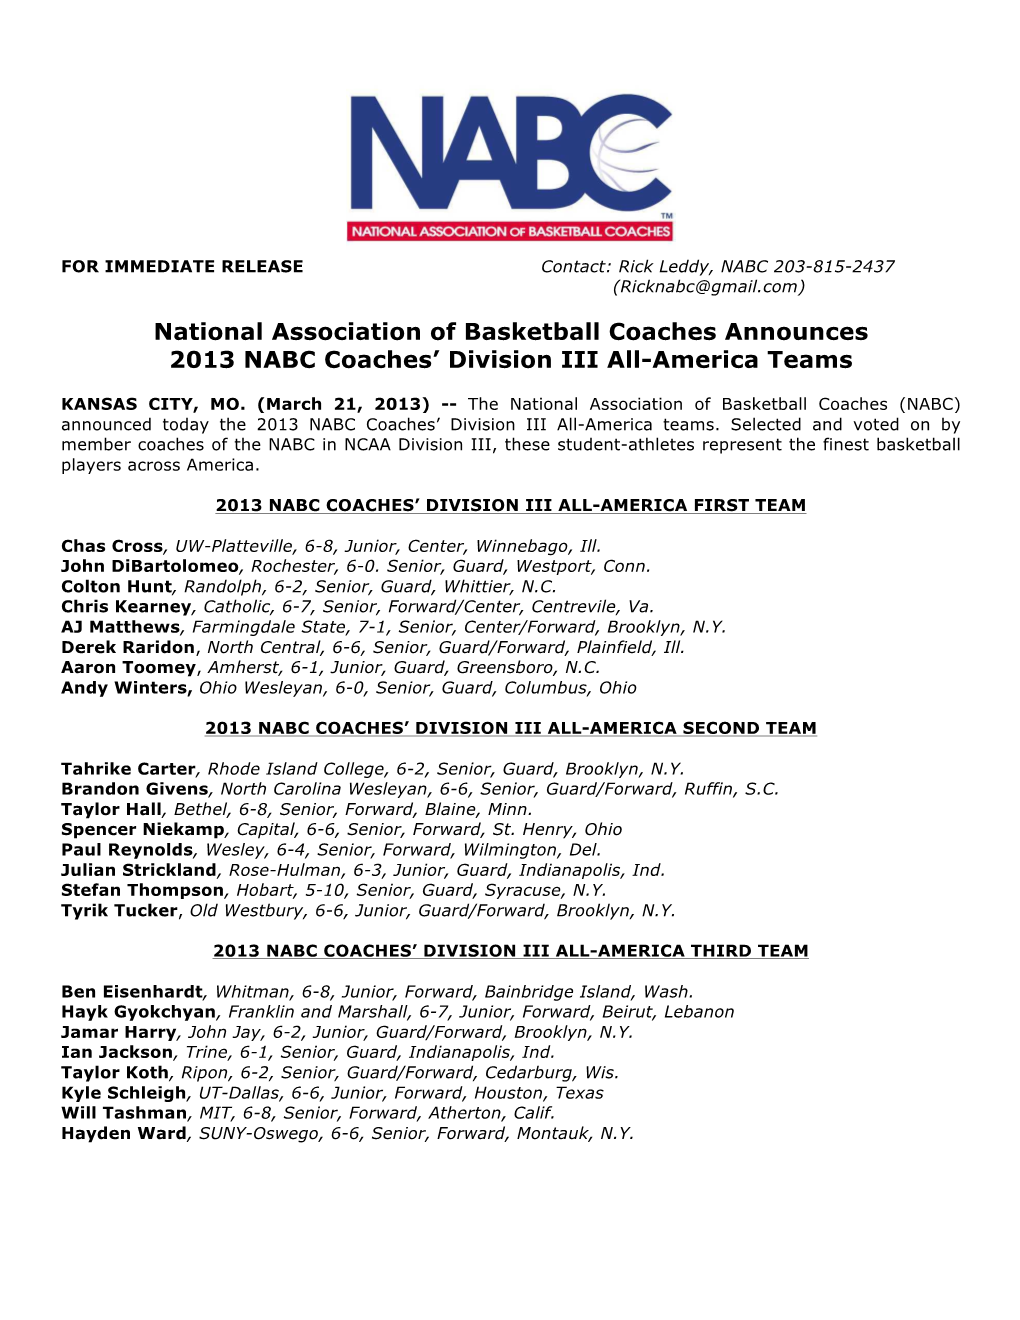 National Association of Basketball Coaches Announces 2013 NABC Coaches’ Division III All-America Teams